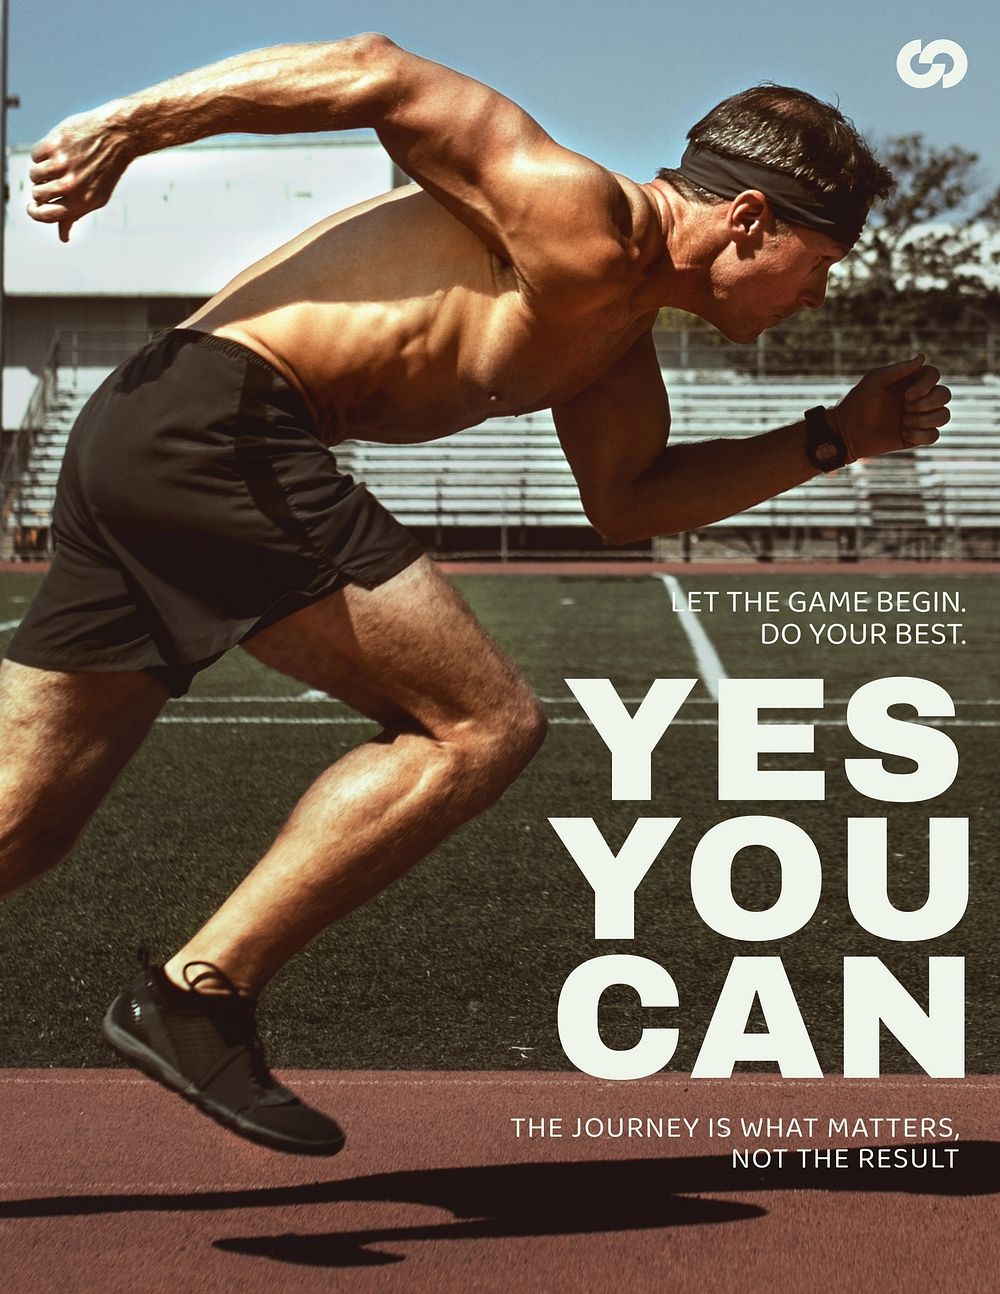 Sports motivation flyer editable template, yes you can text